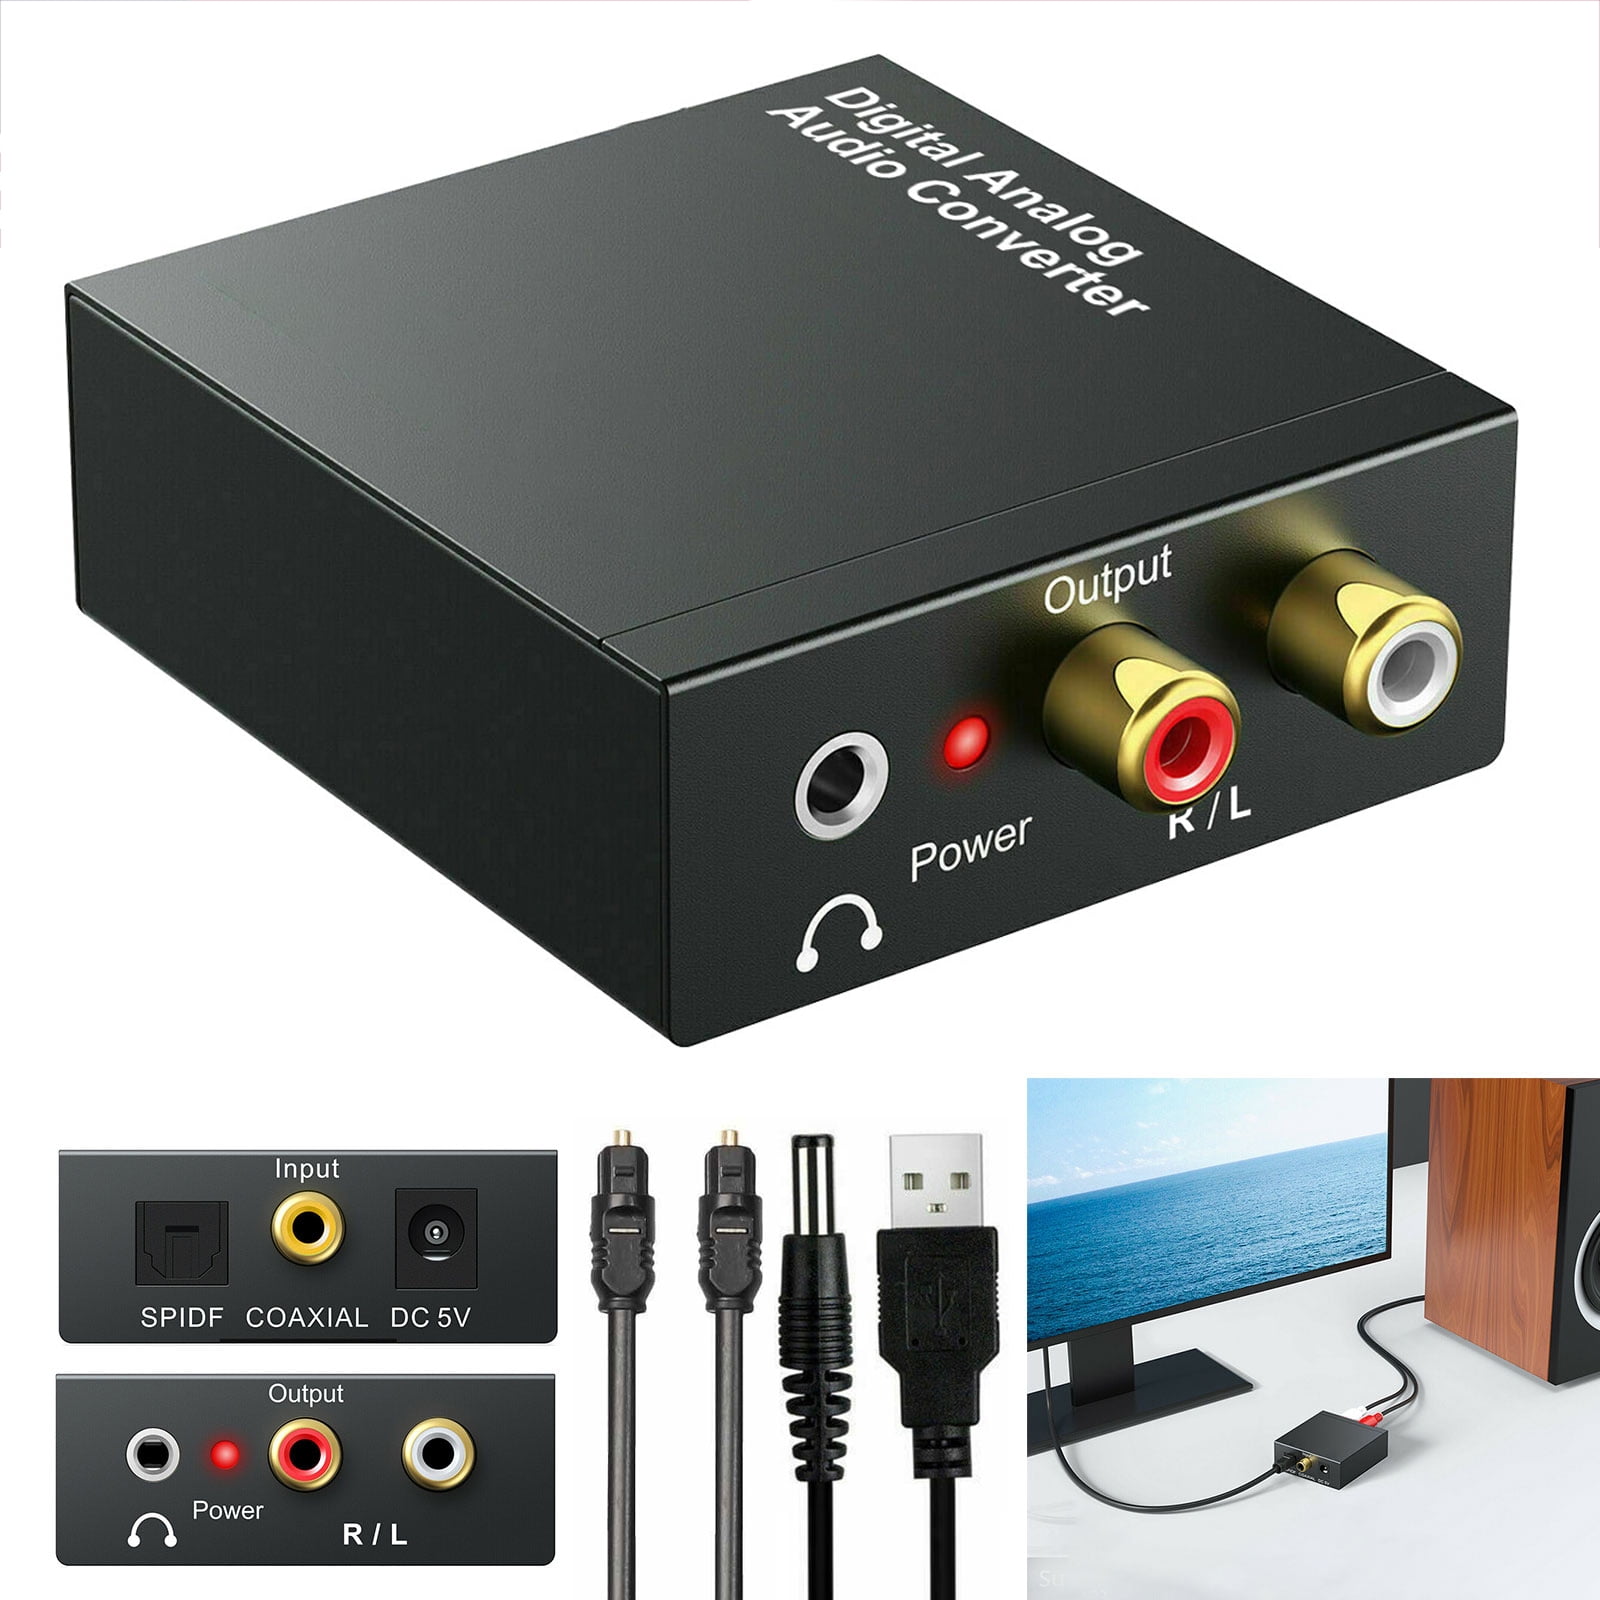 Digital-to-Analog Converter, 96KHz DAC Digital Coaxial and Optical ( Toslink/SPDIF) to 3.5mm AUX and (L/R) Stereo Audio Adapter DAC Converter with Fiber Power Cable - Walmart.com